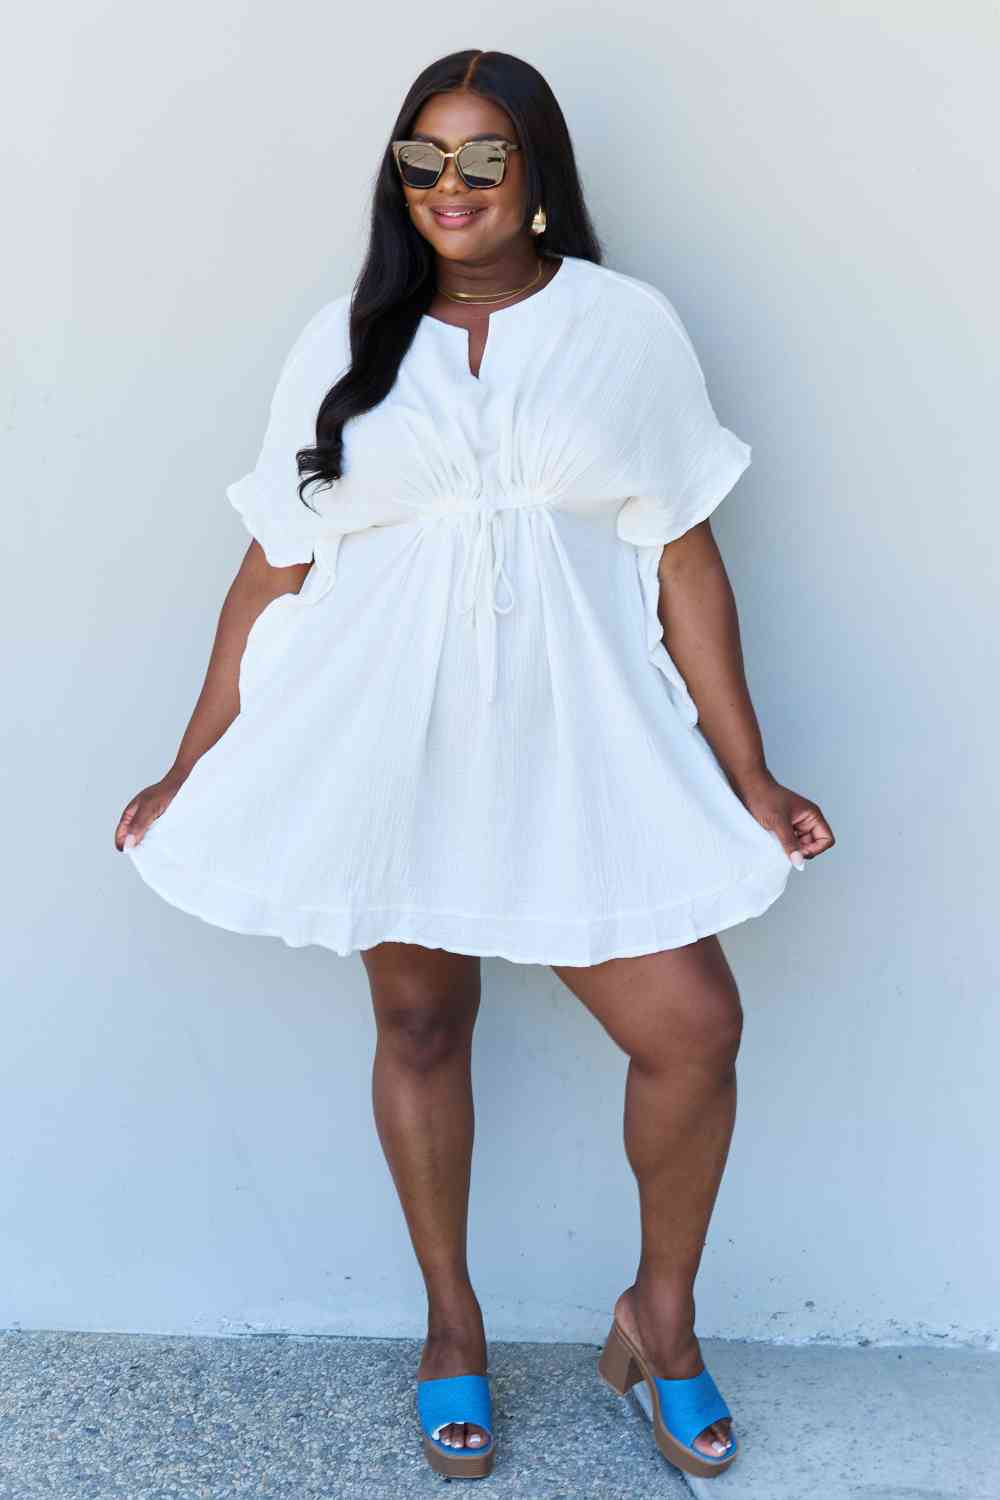 Ninexis Out Of Time Full Size Ruffle Hem Dress with Drawstring Waistband in White No 9